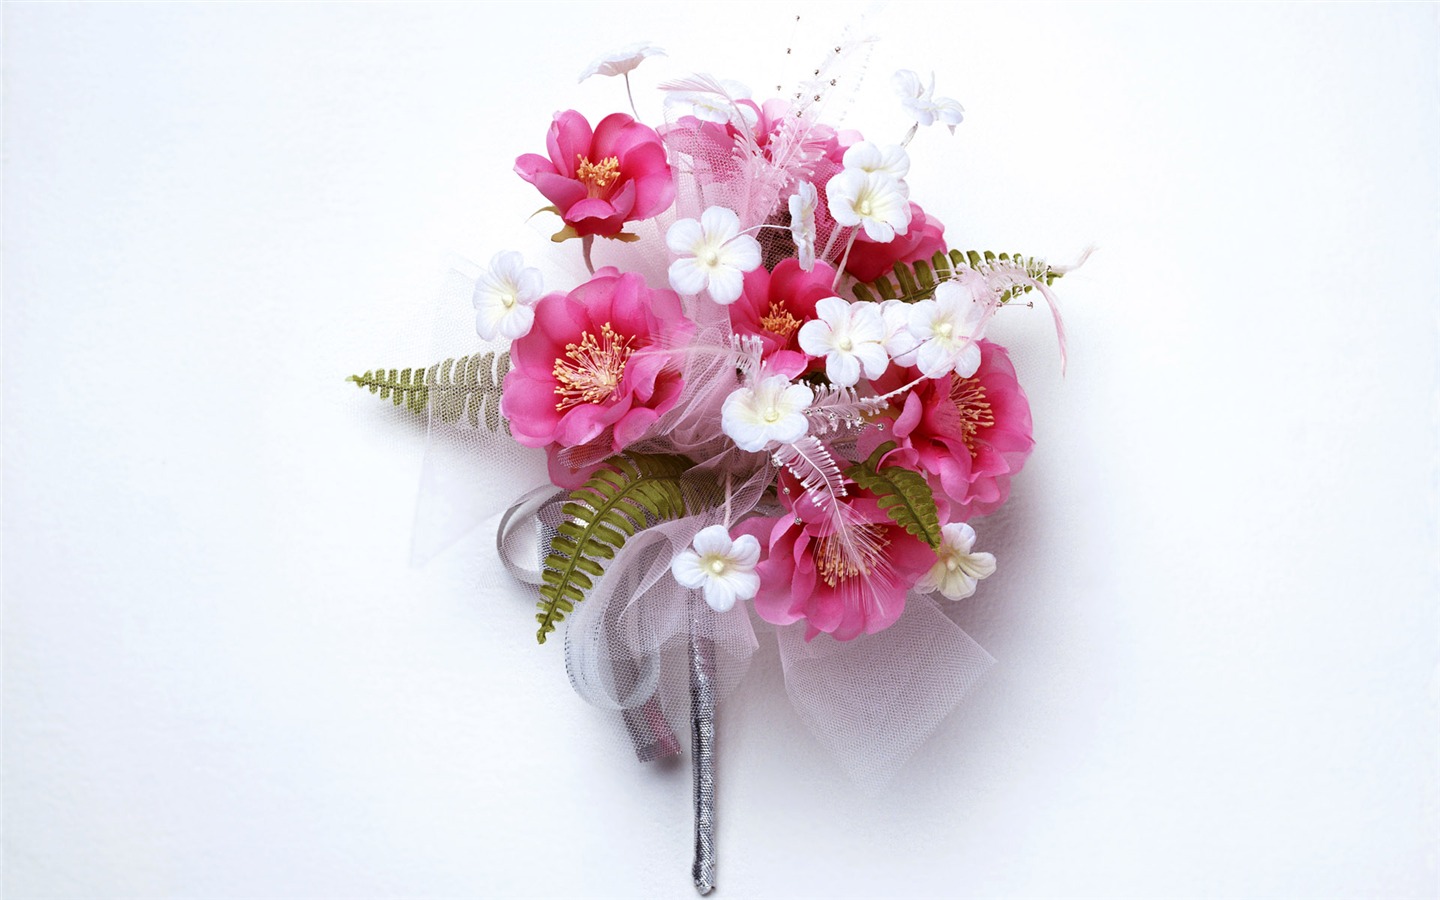 Wedding Flowers items wallpapers (2) #11 - 1440x900